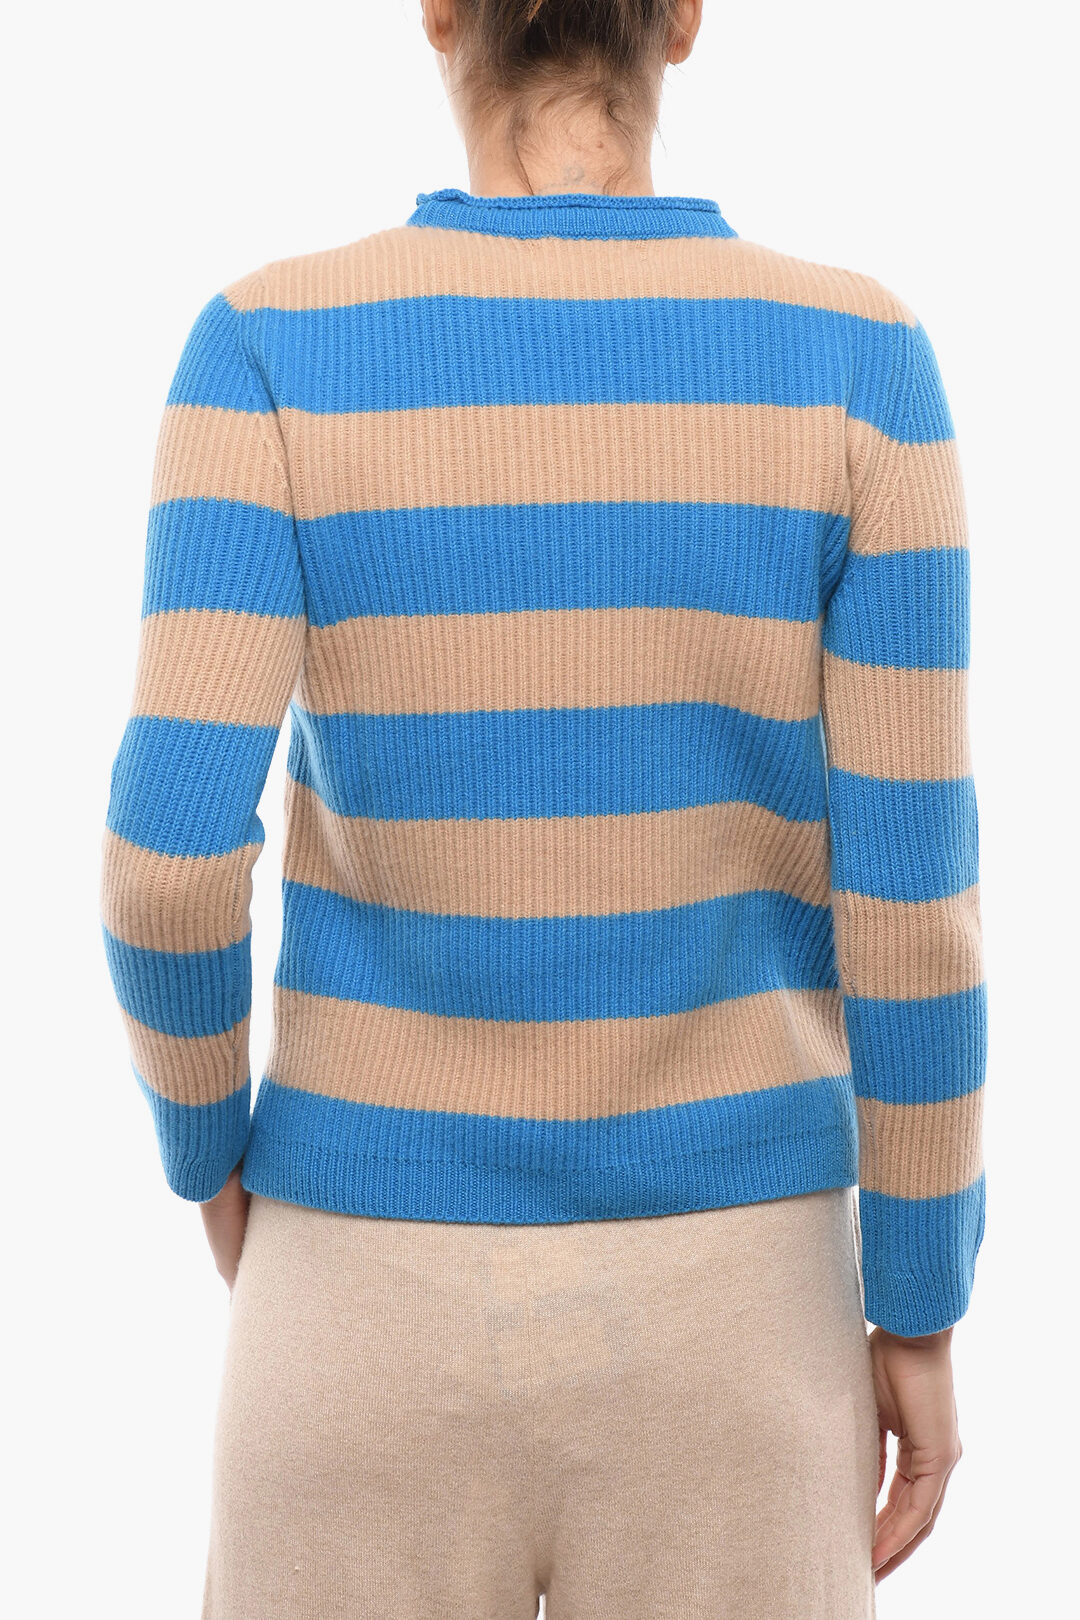 Chicca Lualdi Striped Cashmere Crew-neck Sweater women - Glamood Outlet